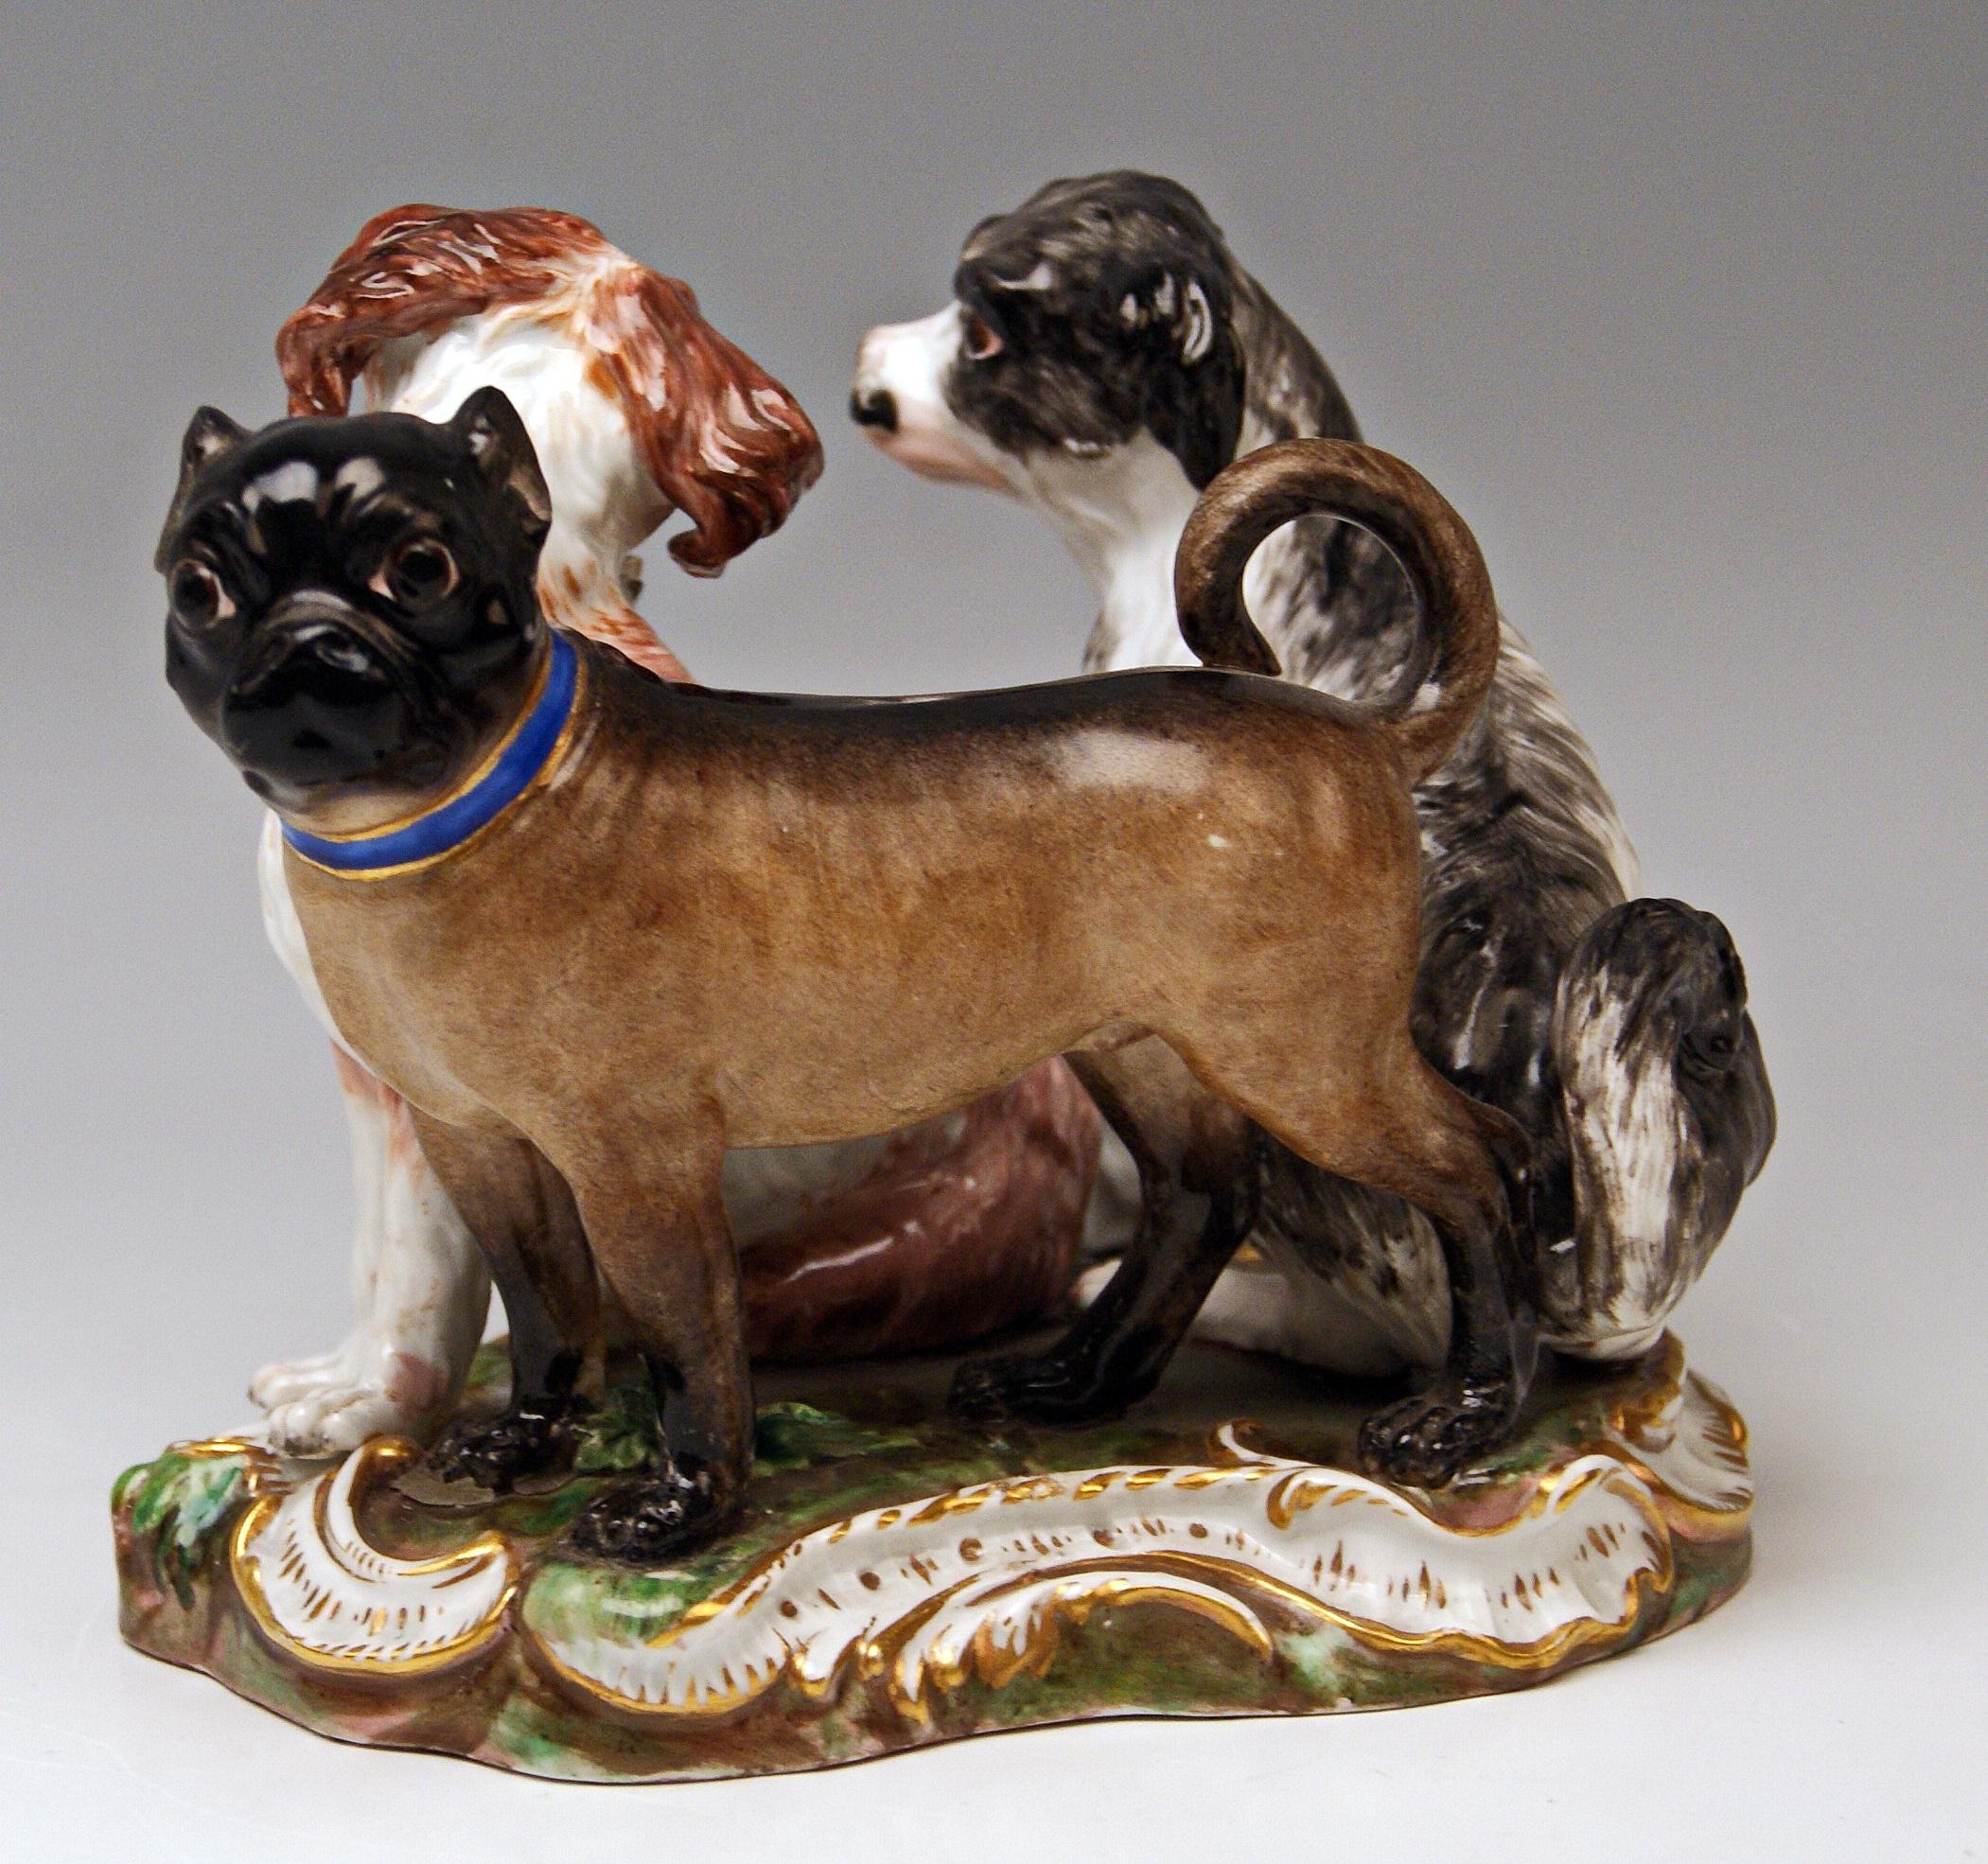 MEISSEN MOST LOVELY ANIMAL FIGURINES: GROUP OF THREE DOGS

Stunningly painted in most lifelike manner
(the dogs are painted in dark and bright brown as well as red brown and white & black). Earthen base with Rocaille ornaments existing.
Please